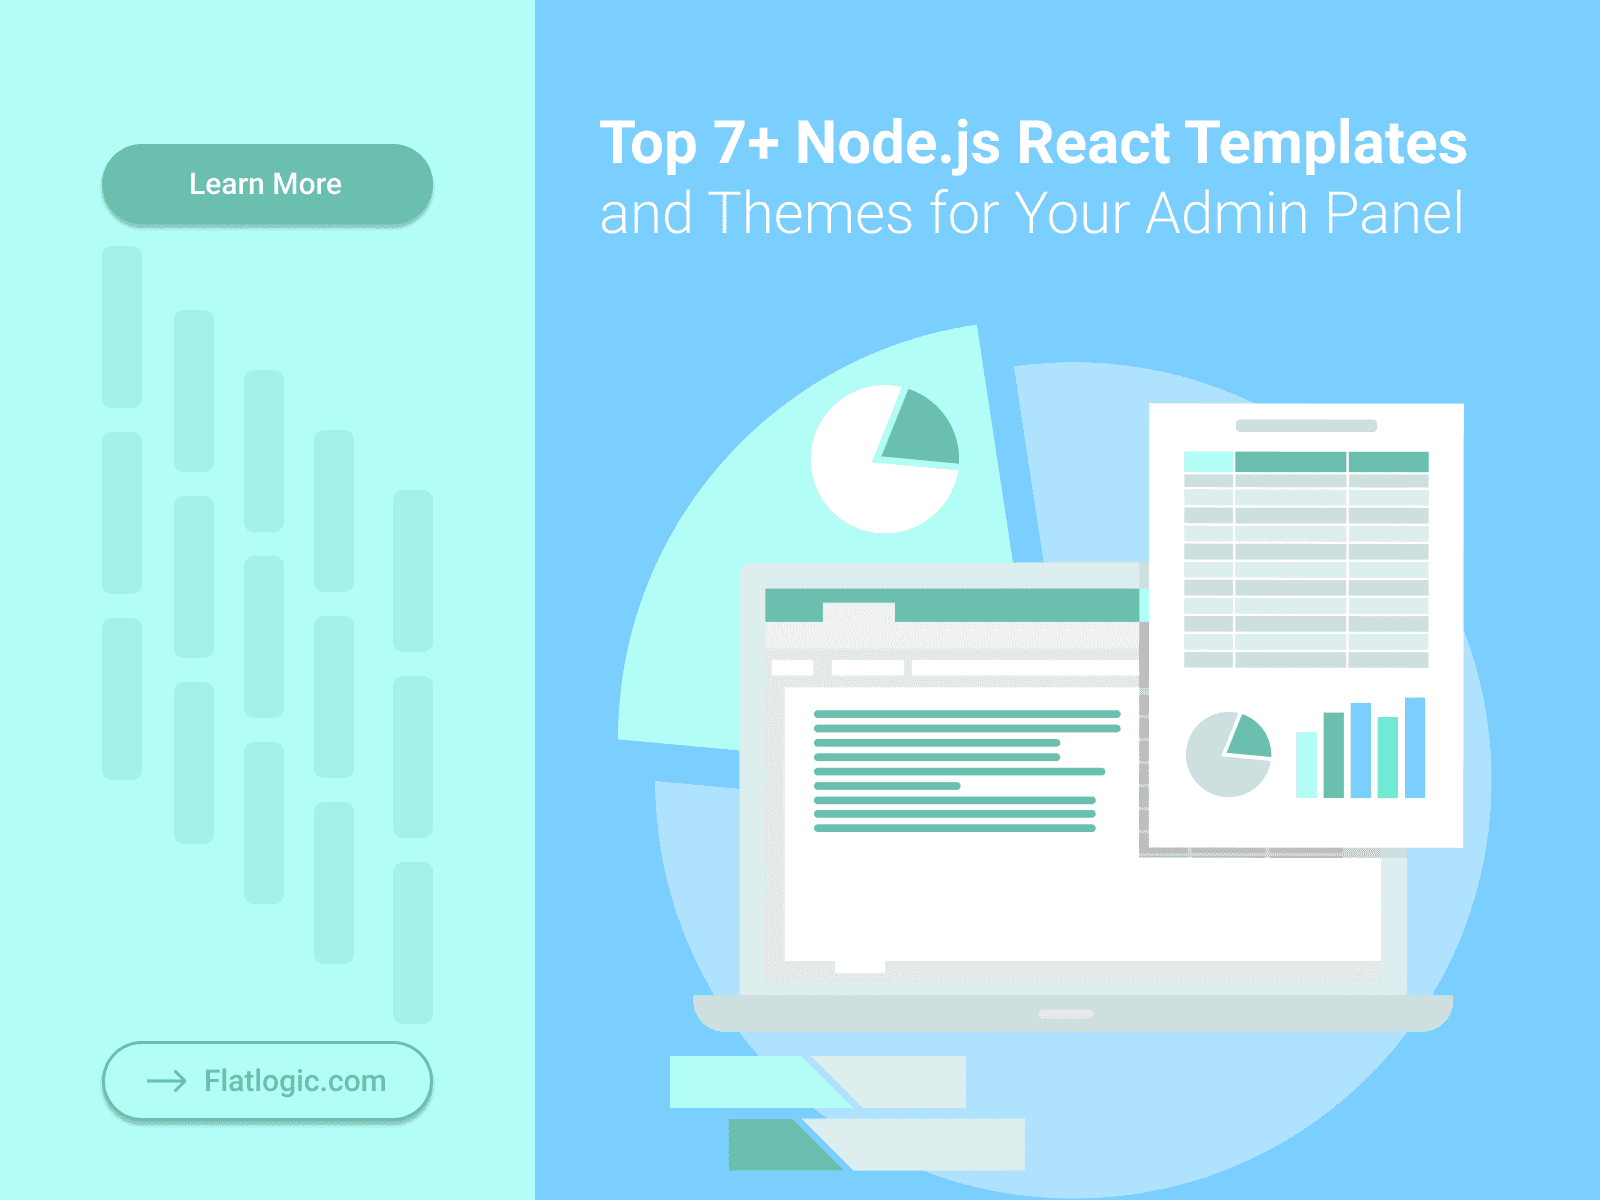 Top 7+ Node.js React Templates and Themes for Your Admin Panel